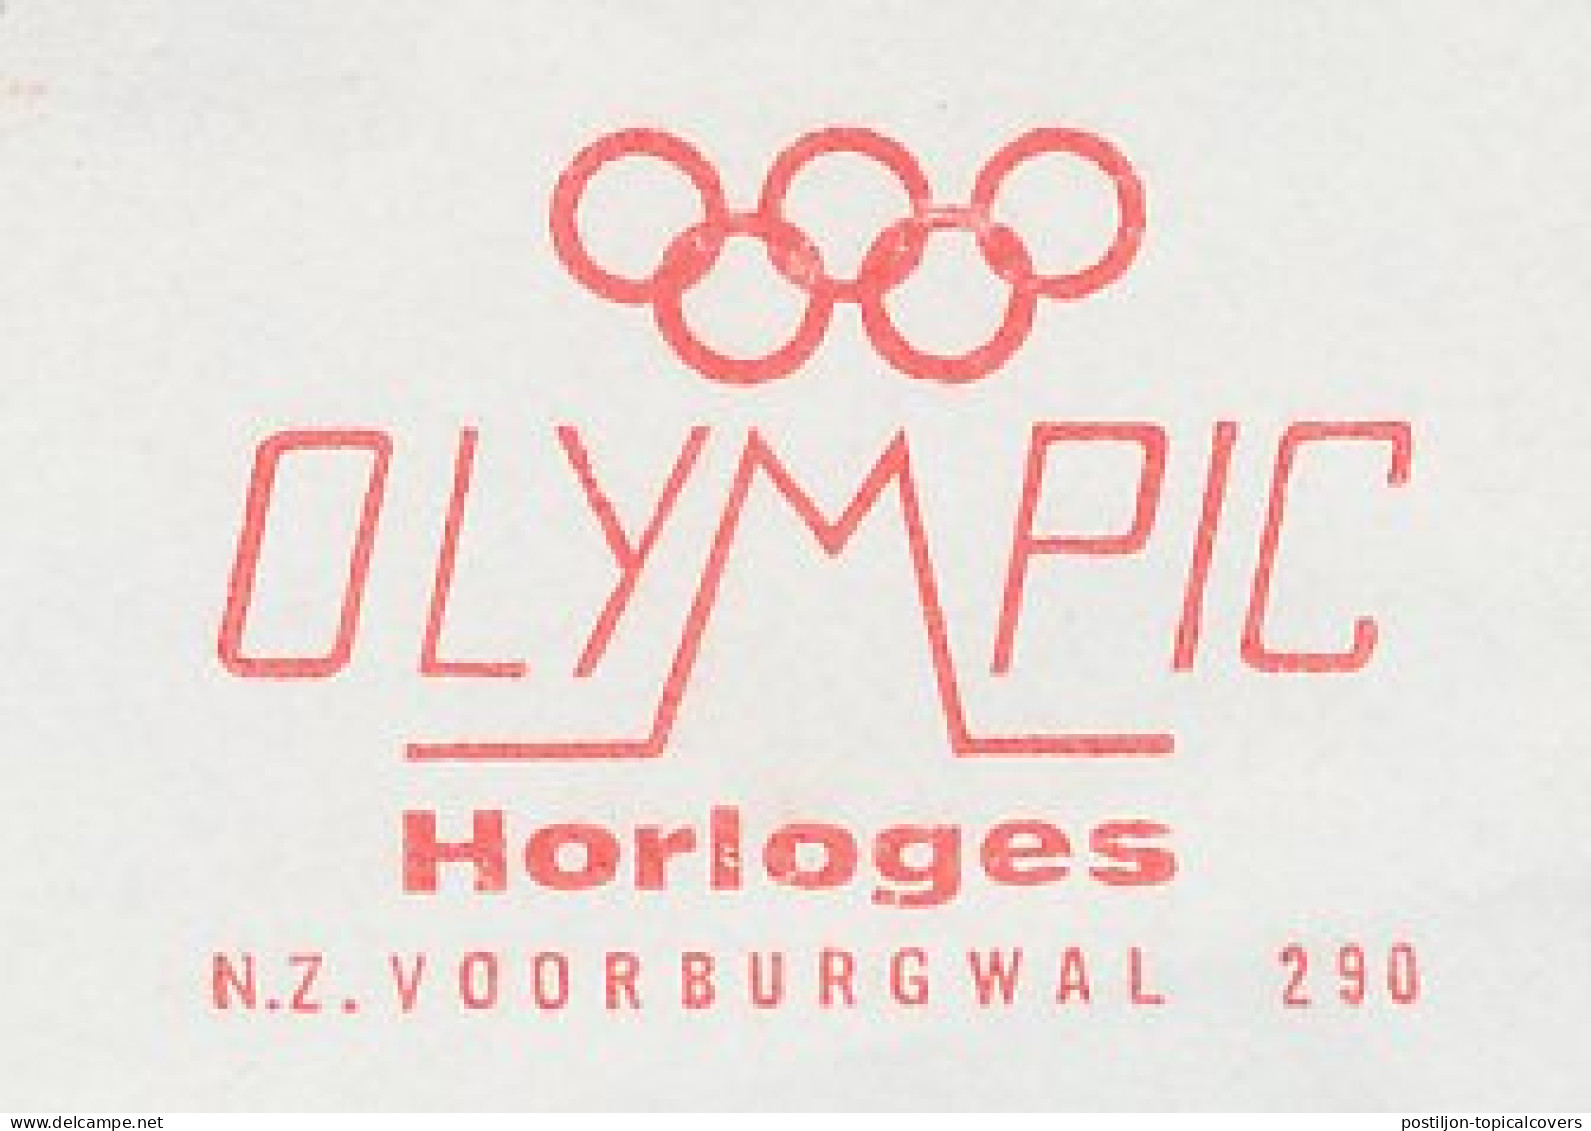 Meter Cover Netherlands 1971 Watch - Olympic - Horloges